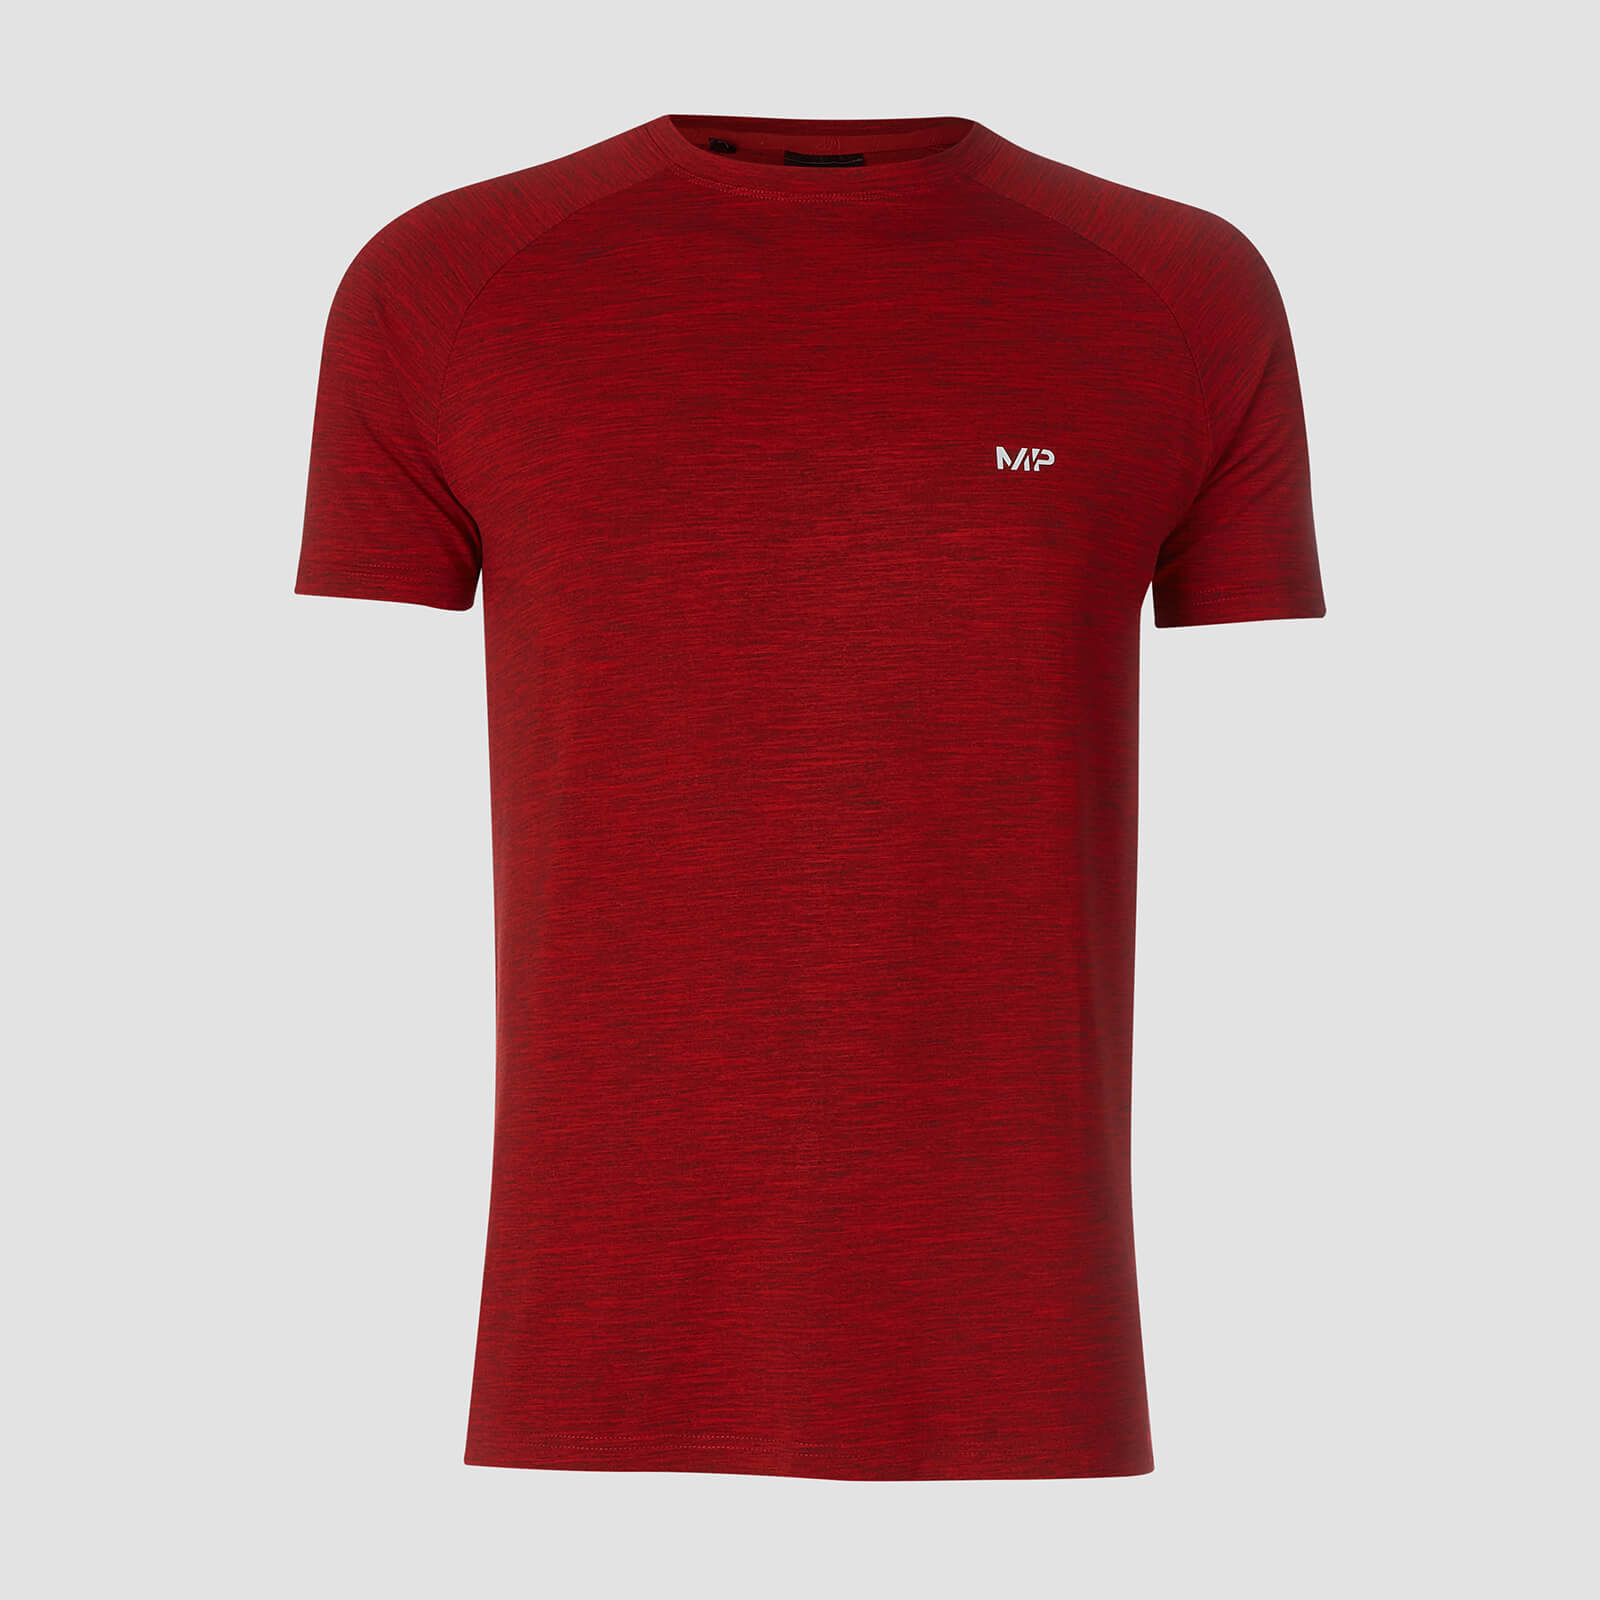 Myprotein T-shirt Performance Short Sleeve MP - Rosso acceso/Nero - L